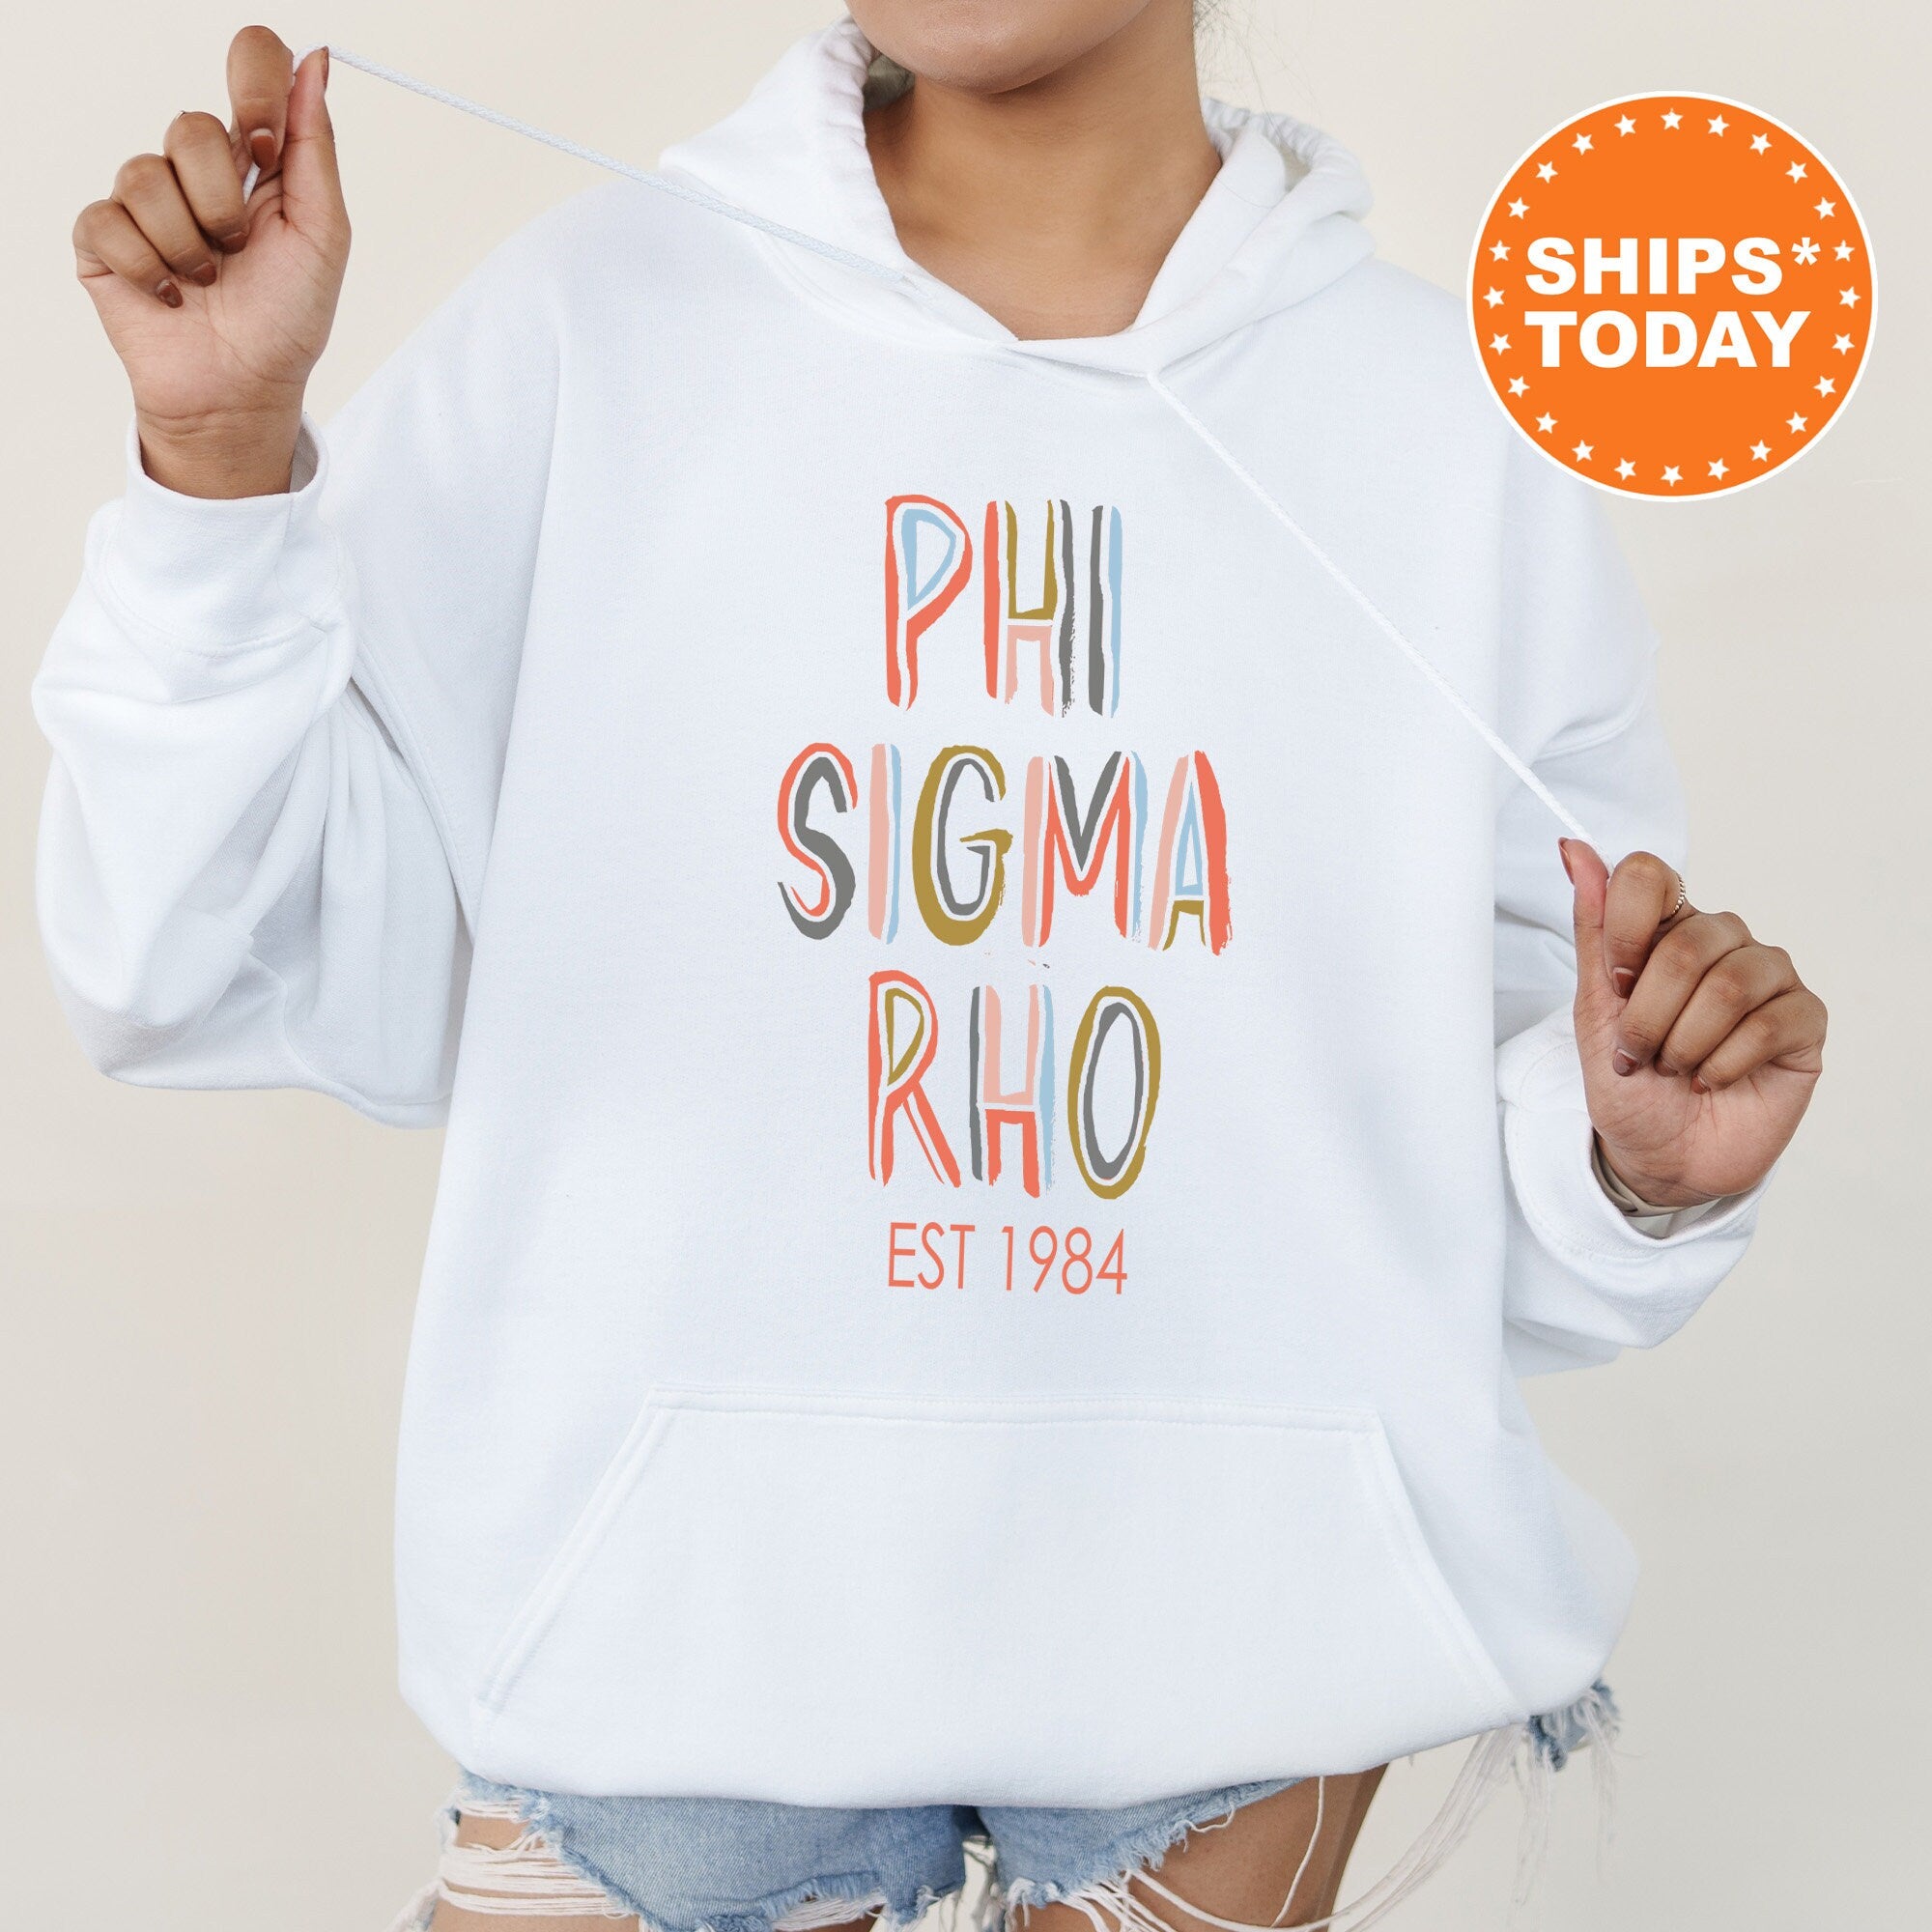 Phi Sigma Rho Collection - SHIPS TODAY - Kite and Crest